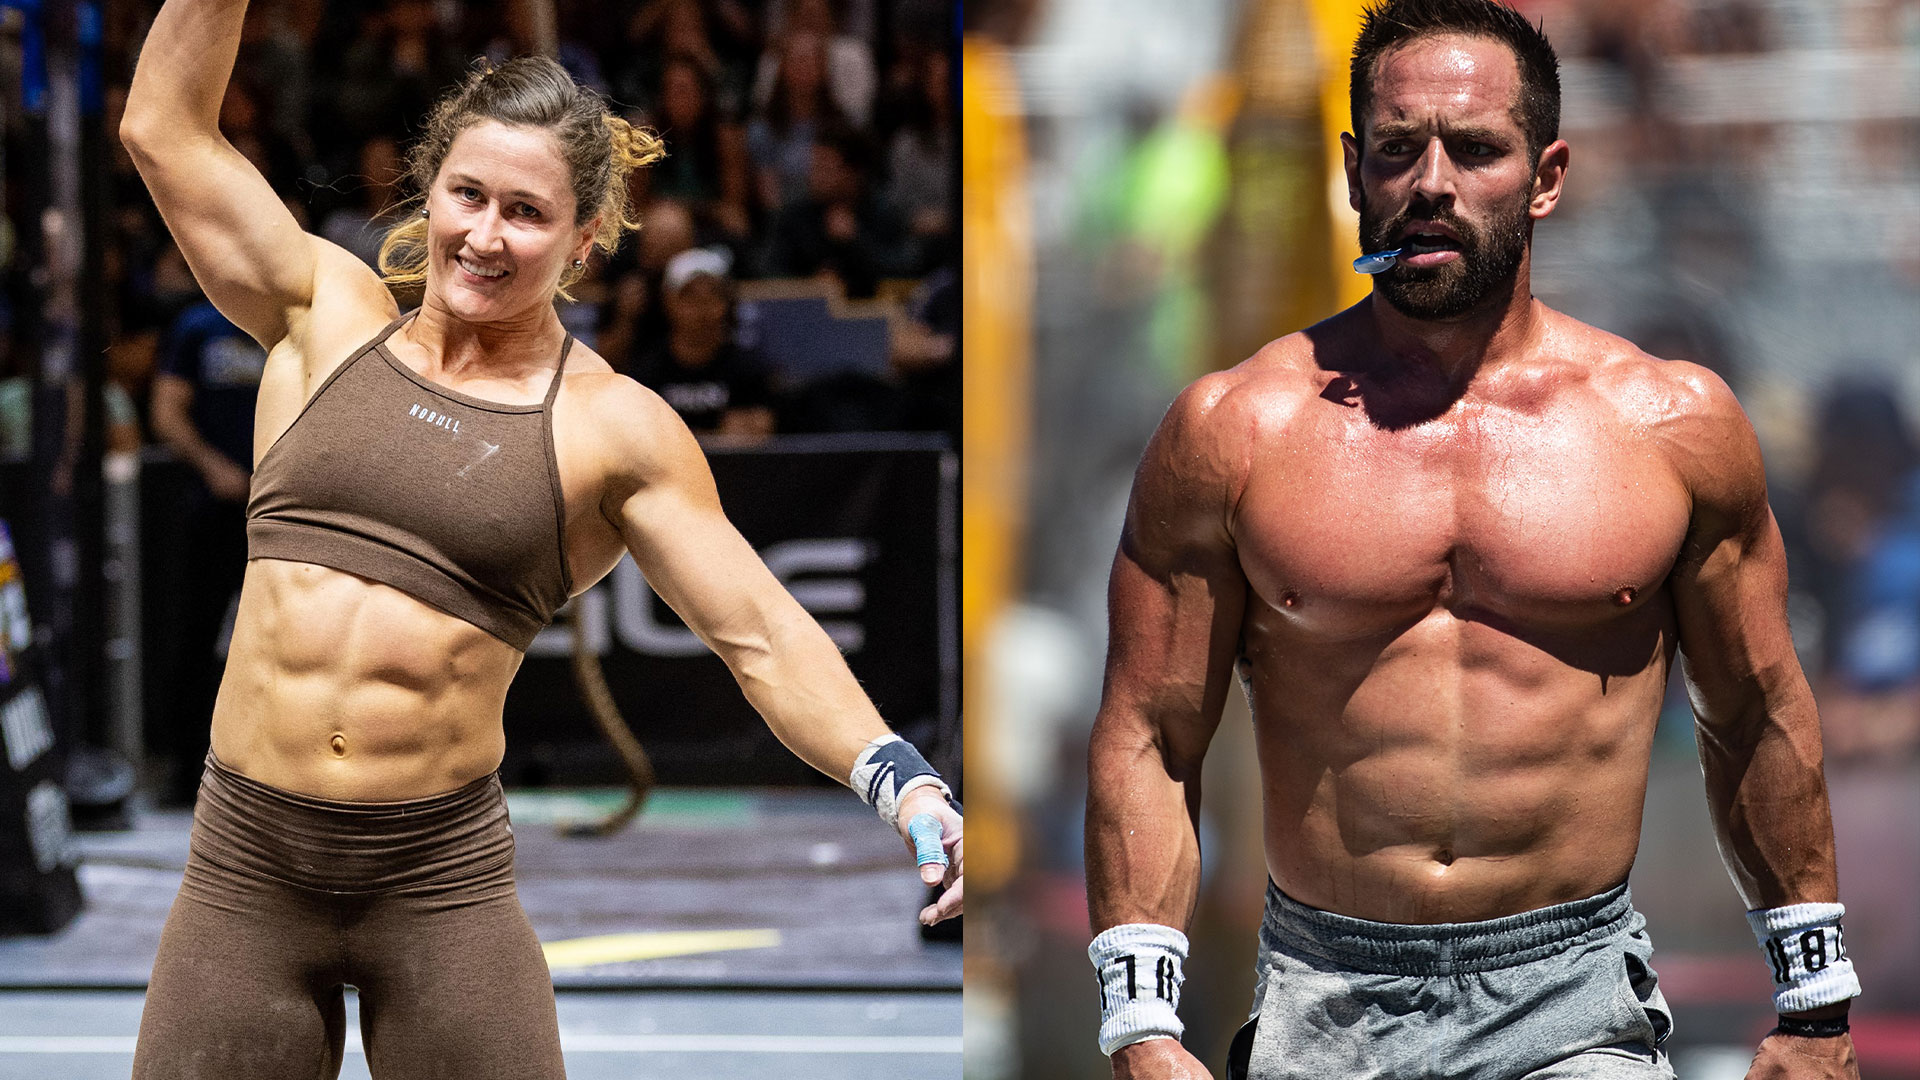 Tia-Clair Toomey e Rich Froning